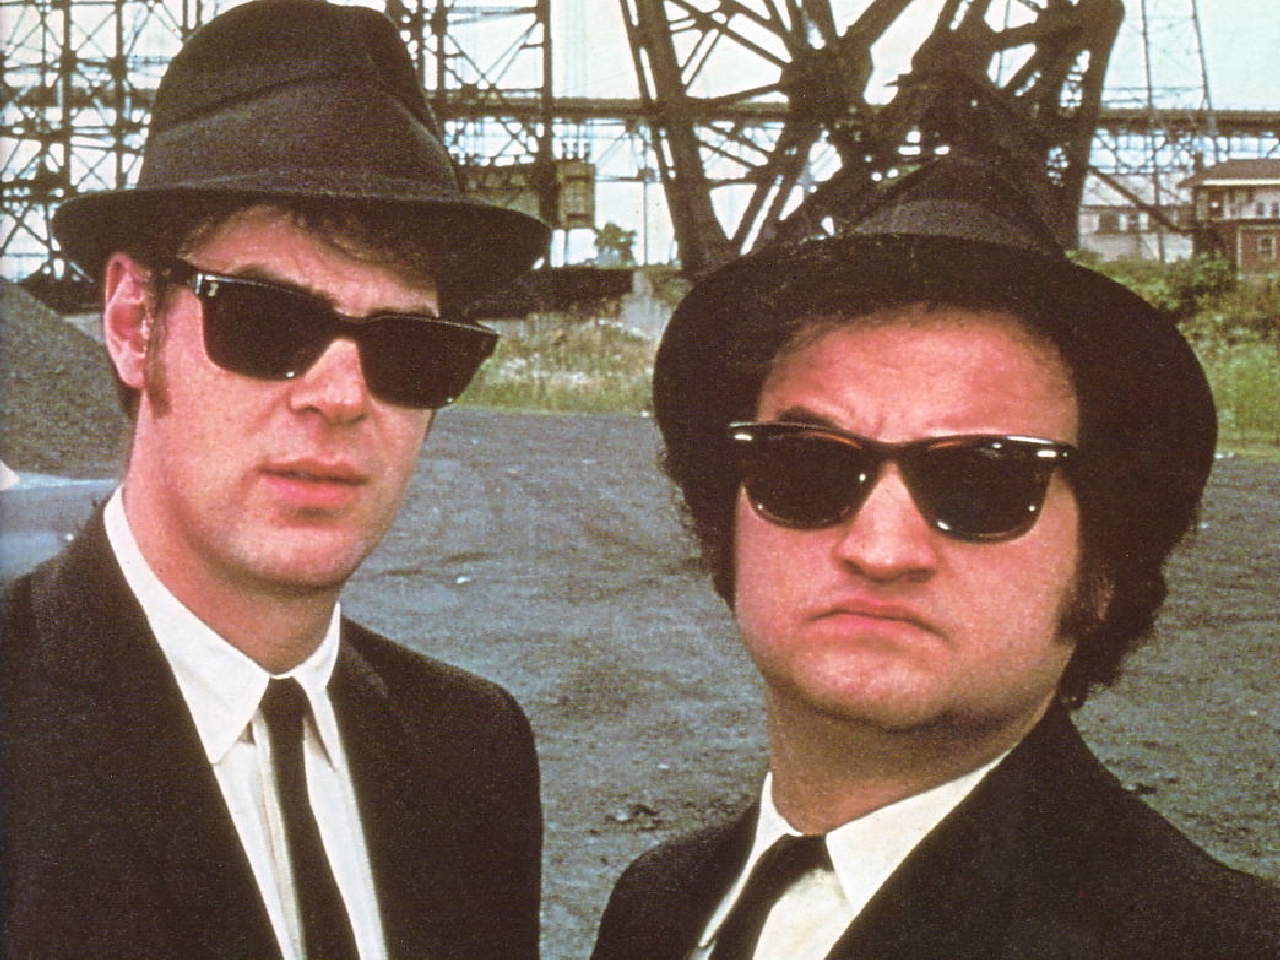 movie, the blues brothers